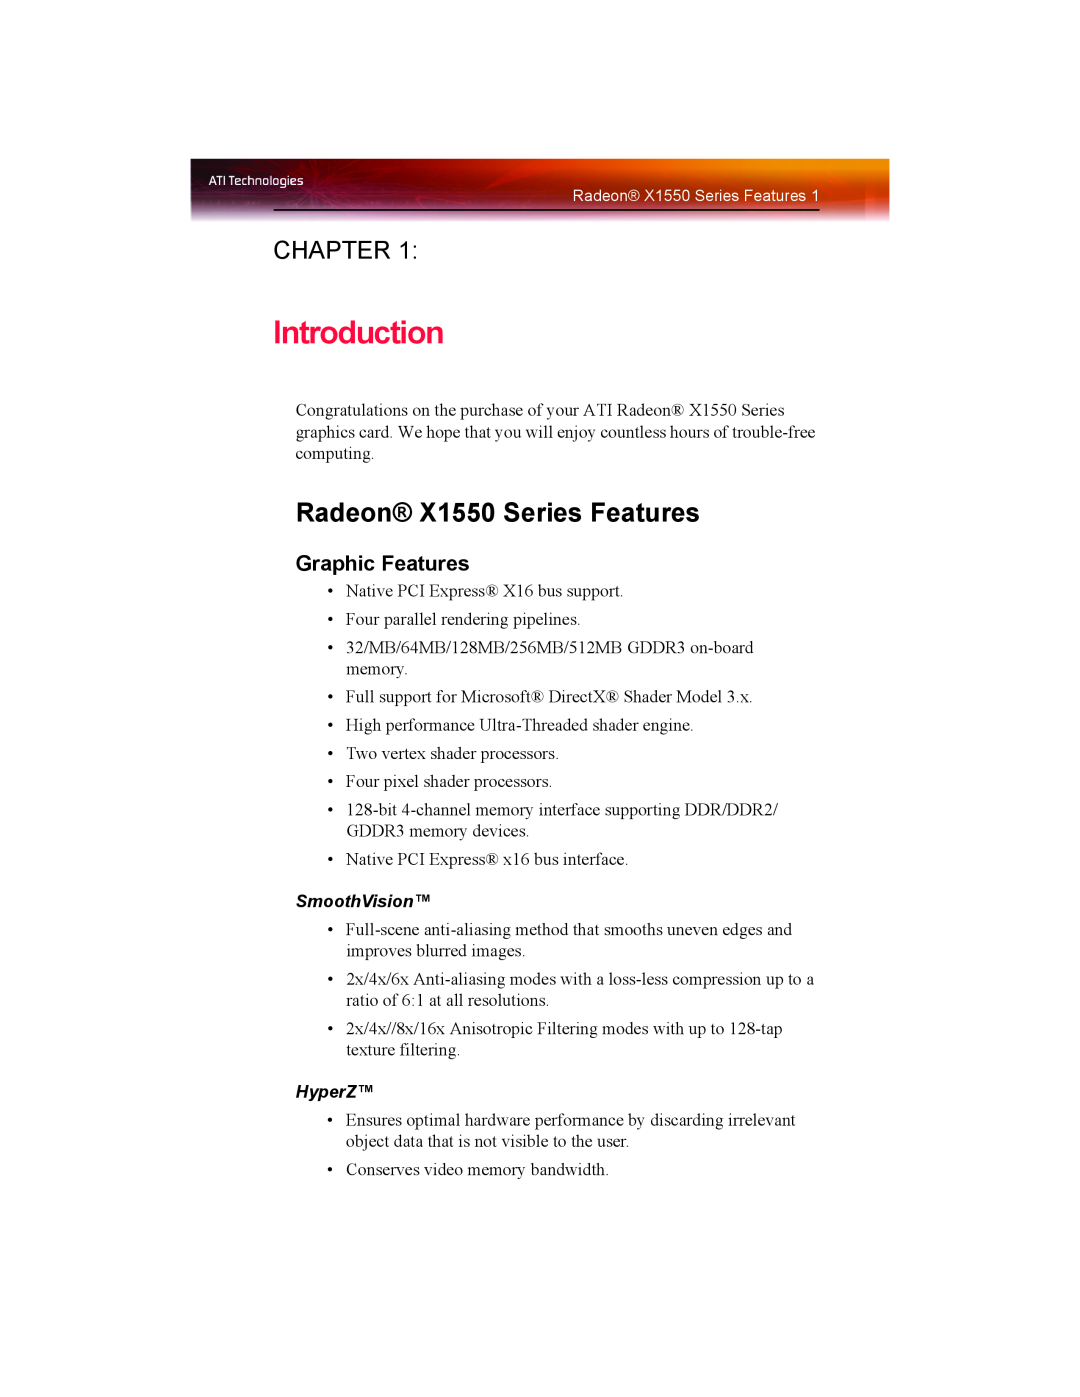 ATI Technologies X1550 SERIES manual Introduction, Radeon X1550 Series Features, Chapter, SmoothVision, HyperZ 